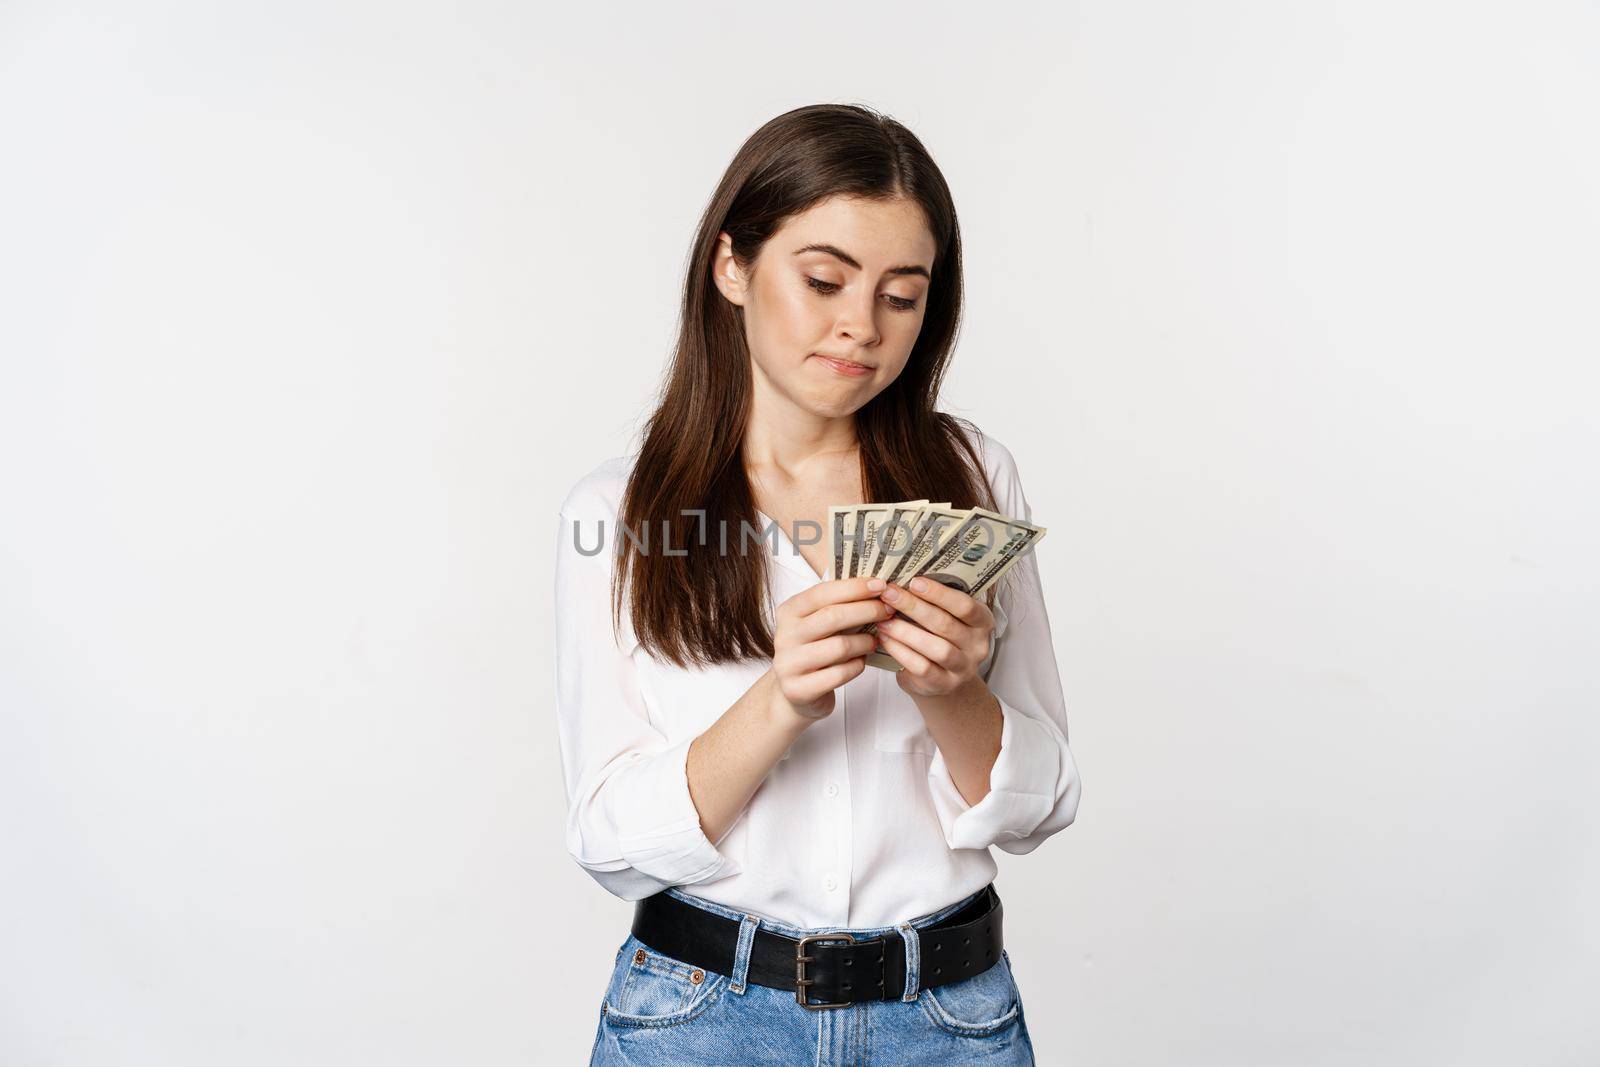 Sad woman counting money, lacking cash, standing gloomy over white background.